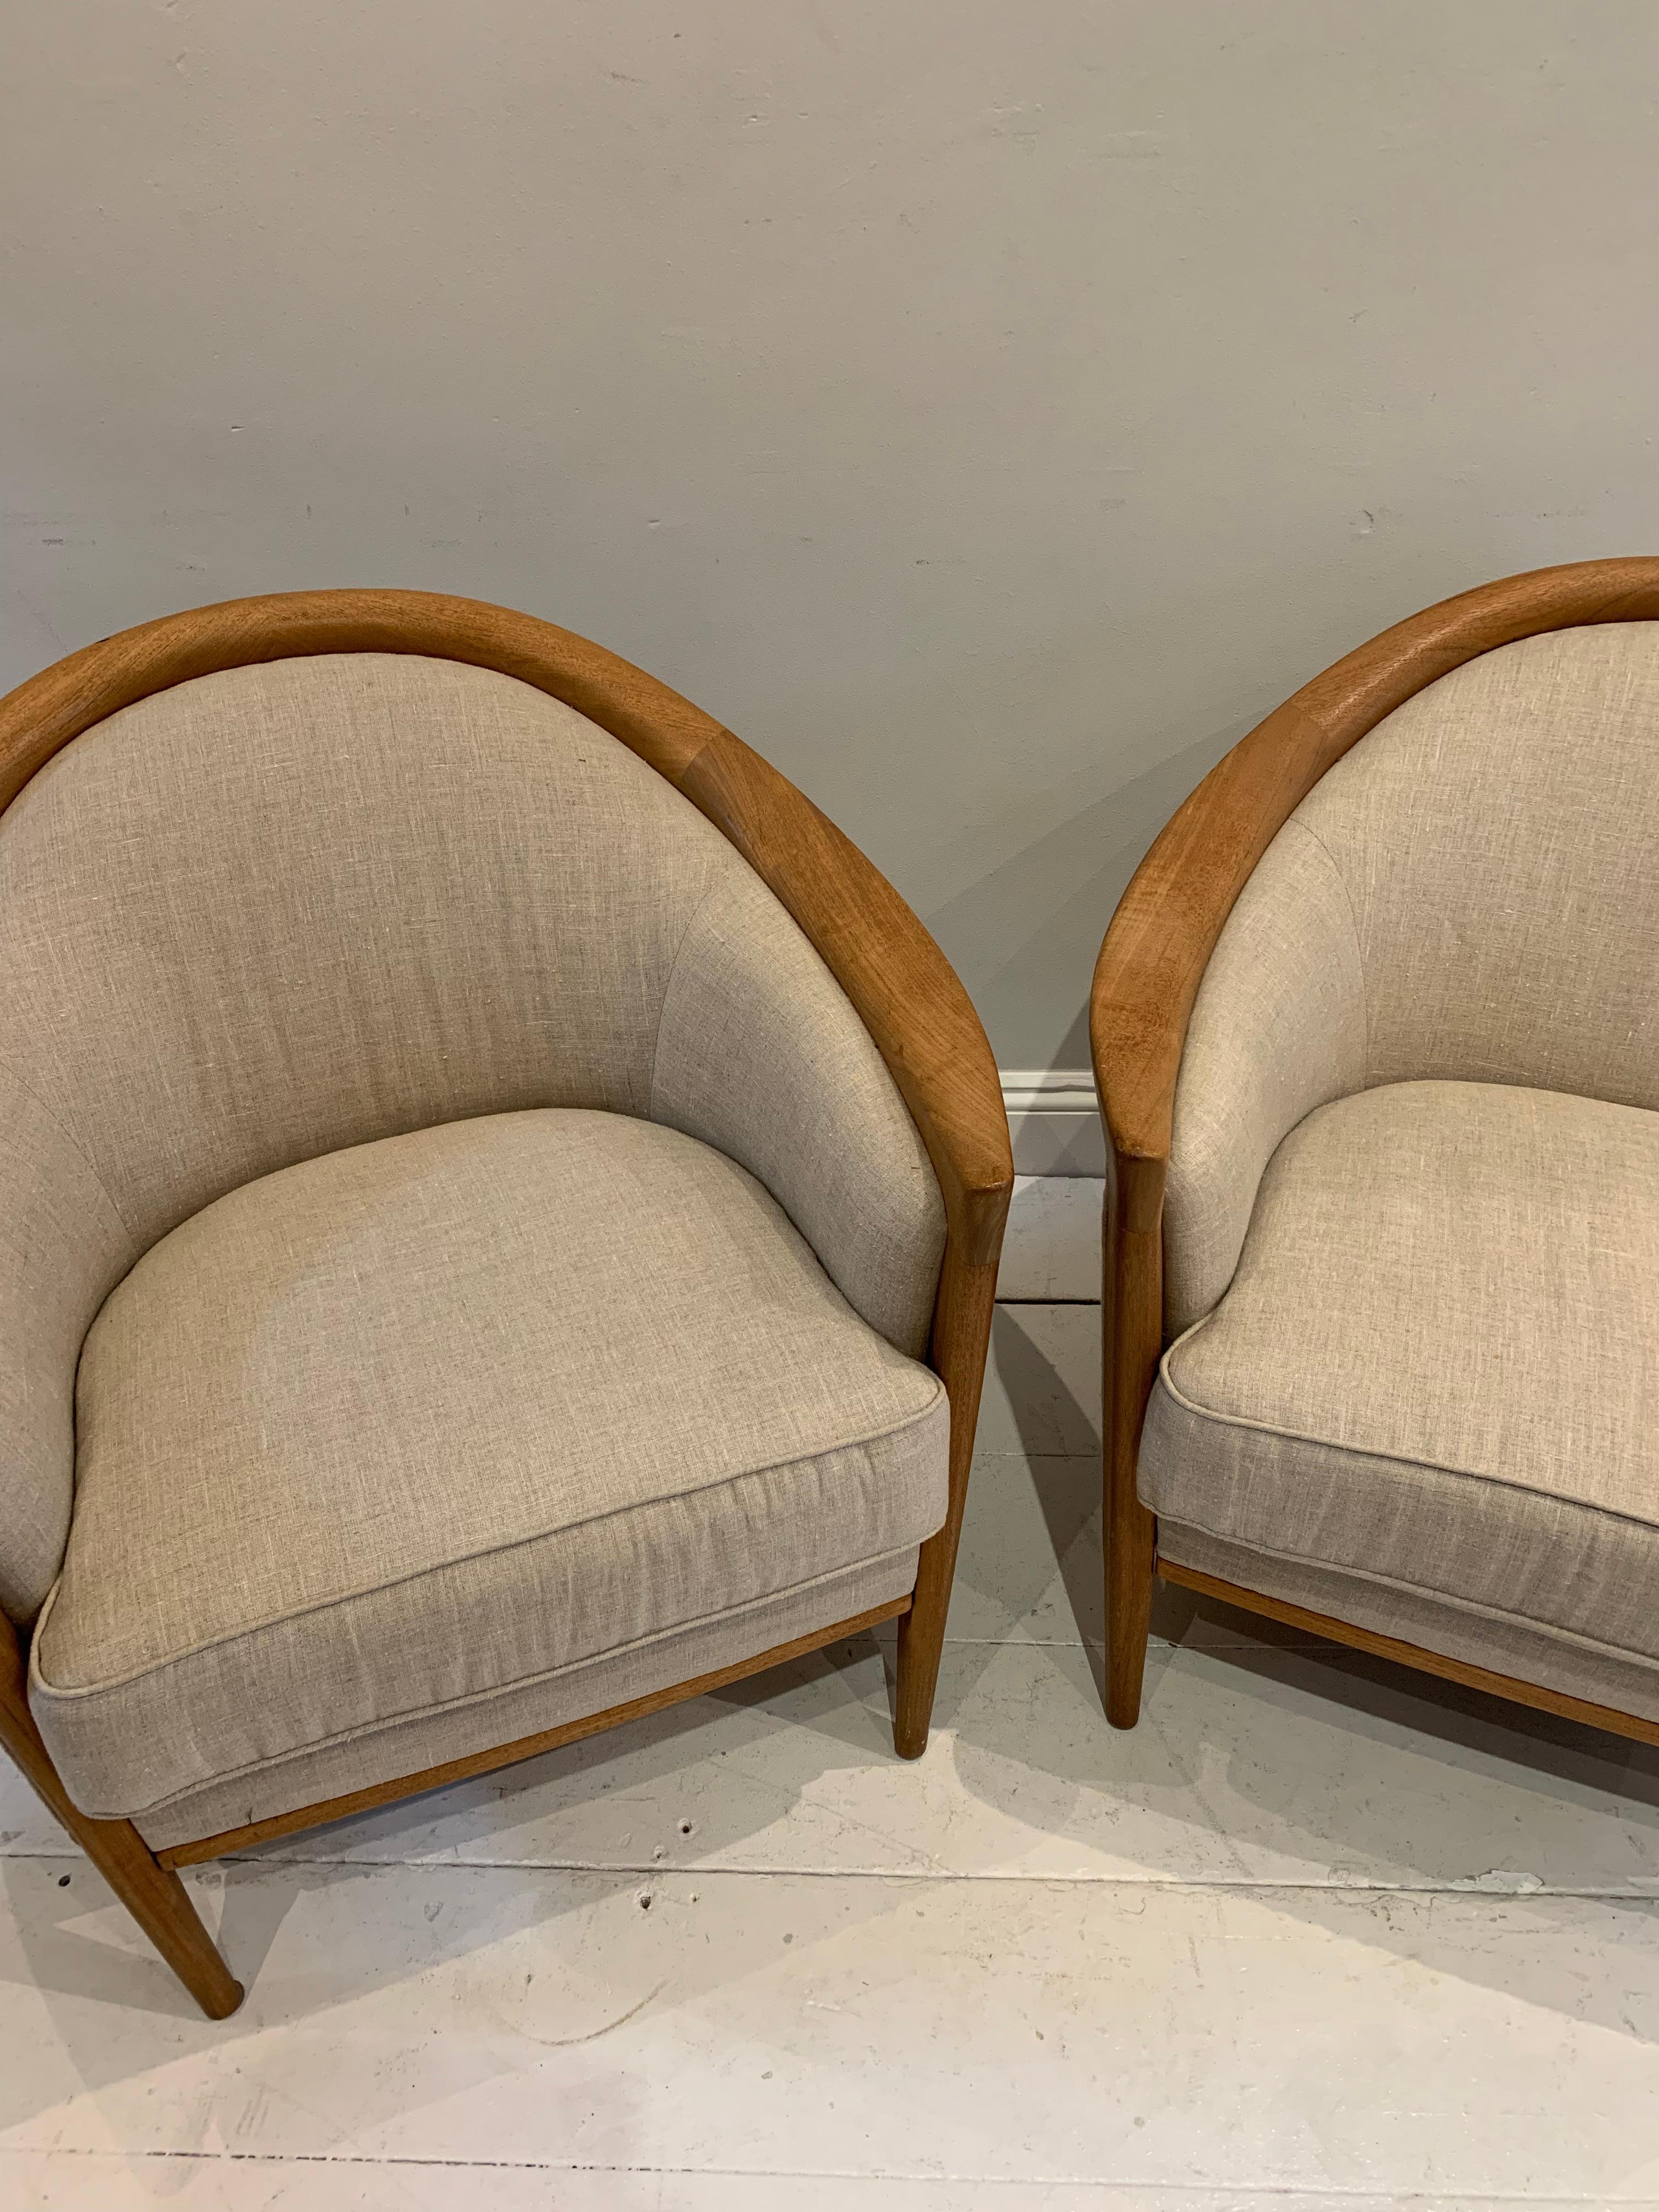 Pair of 1960s Swedish Oak Curved Armchairs Reupholstered in a Neutral Linen For Sale 5